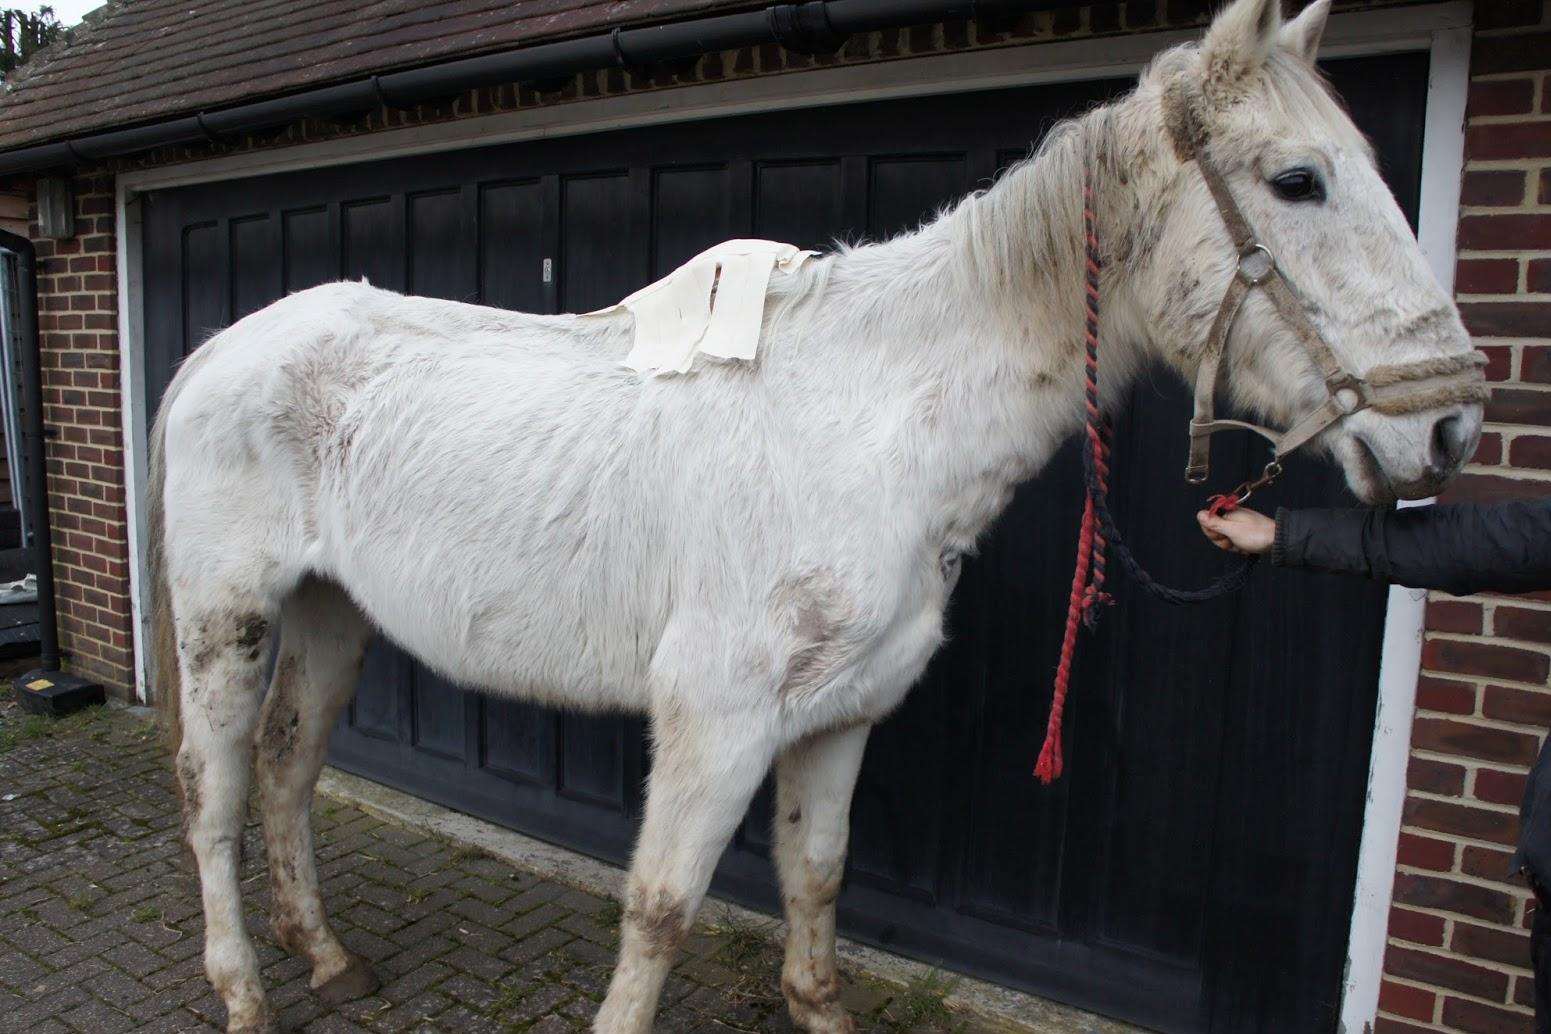 A woman has been disqualified from keeping horses for two years after being found guilty to causing suffering to her grey gelding called Tomboy.